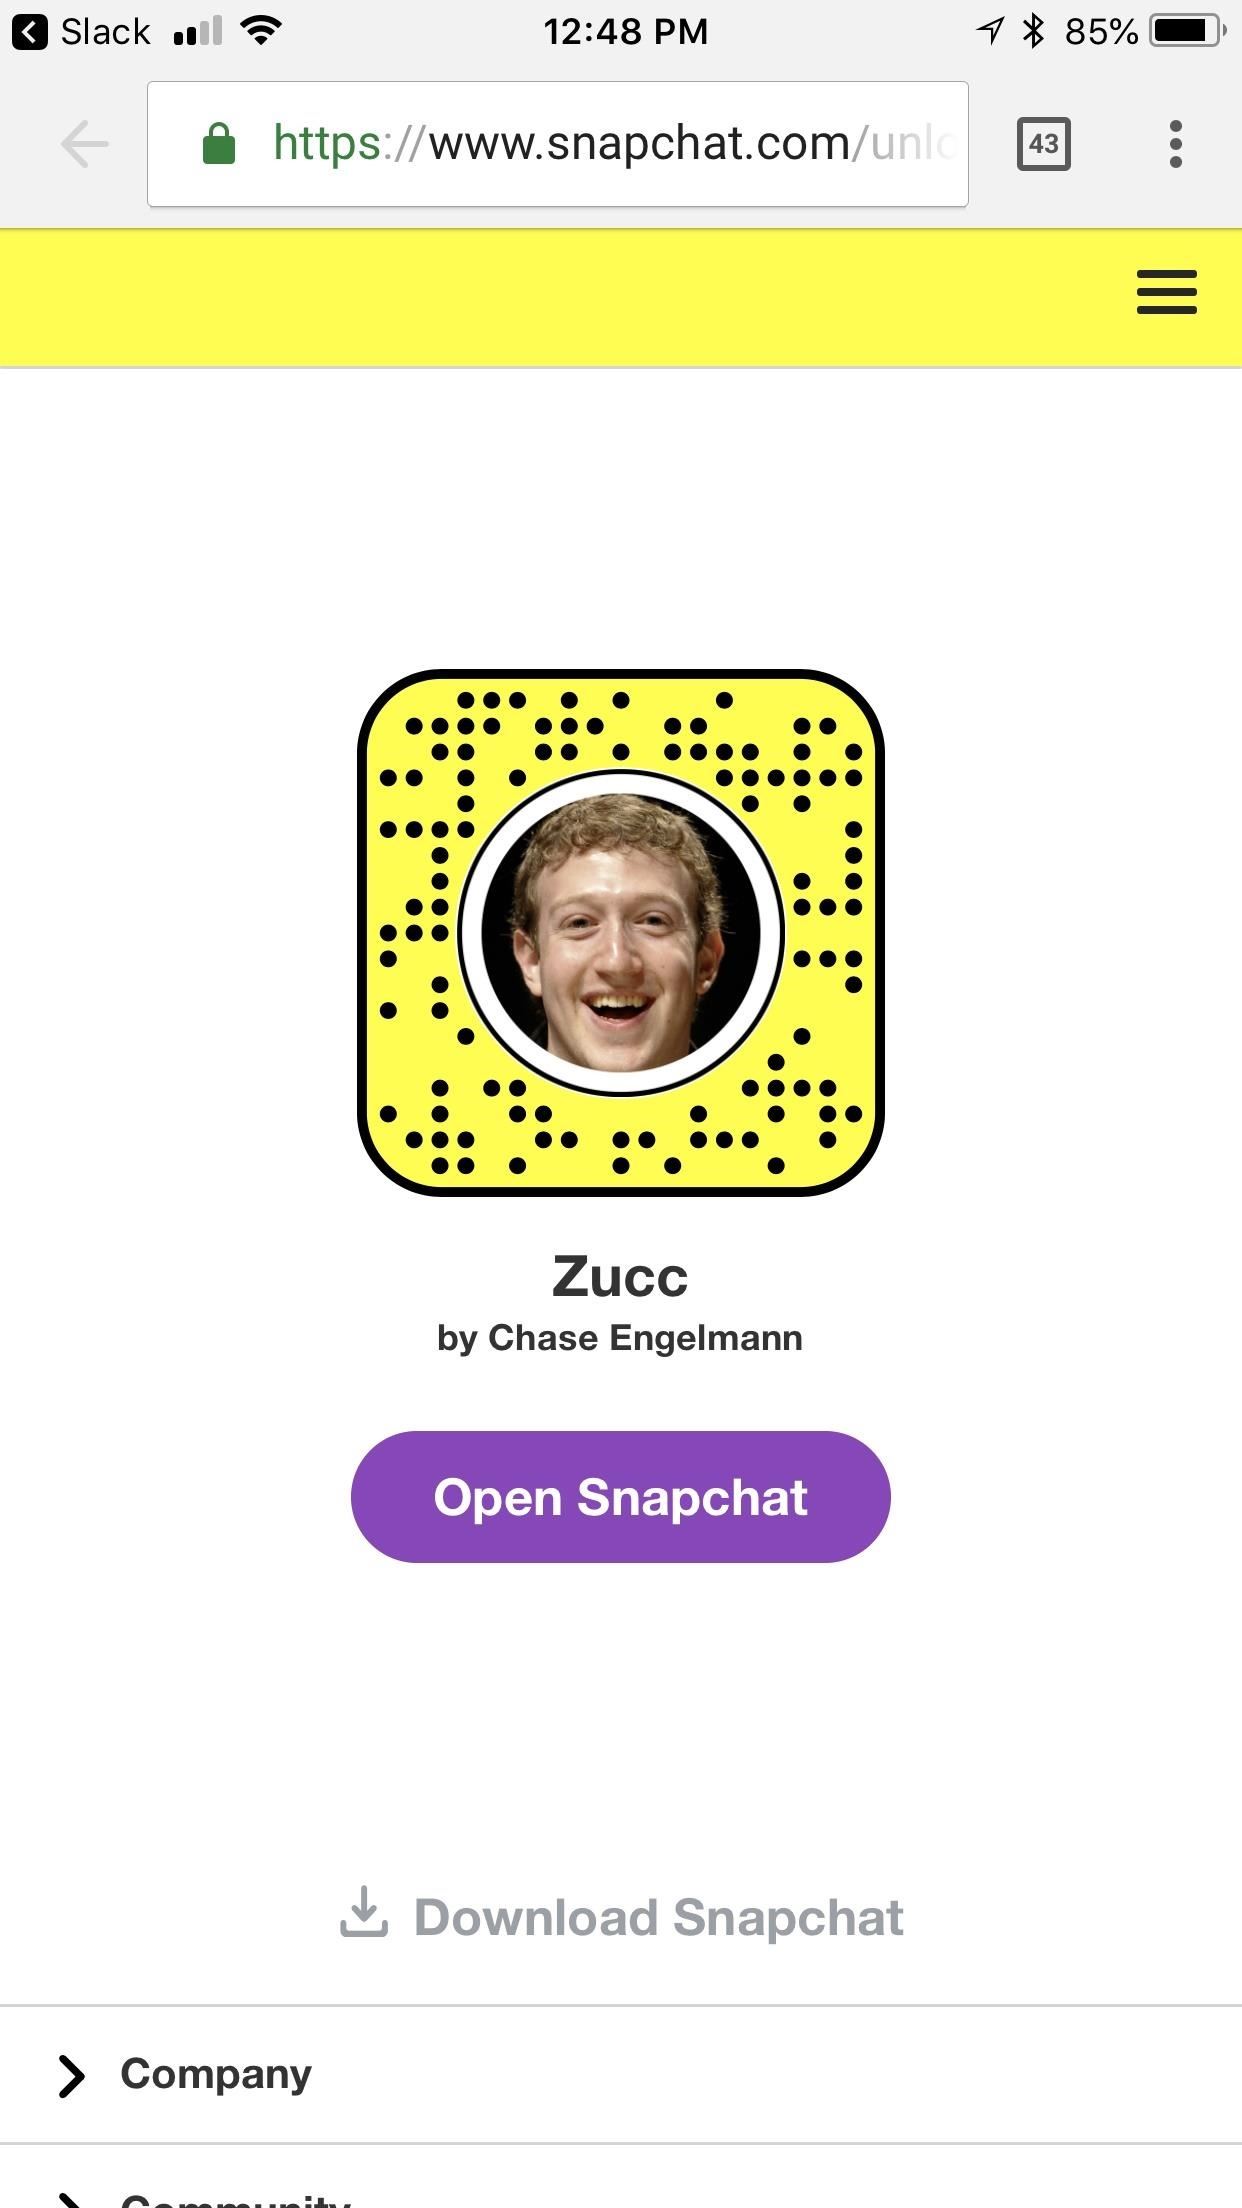 Try These 5 Hot New Snapchat Lenses — The Zucc, PUBG Helmet & More